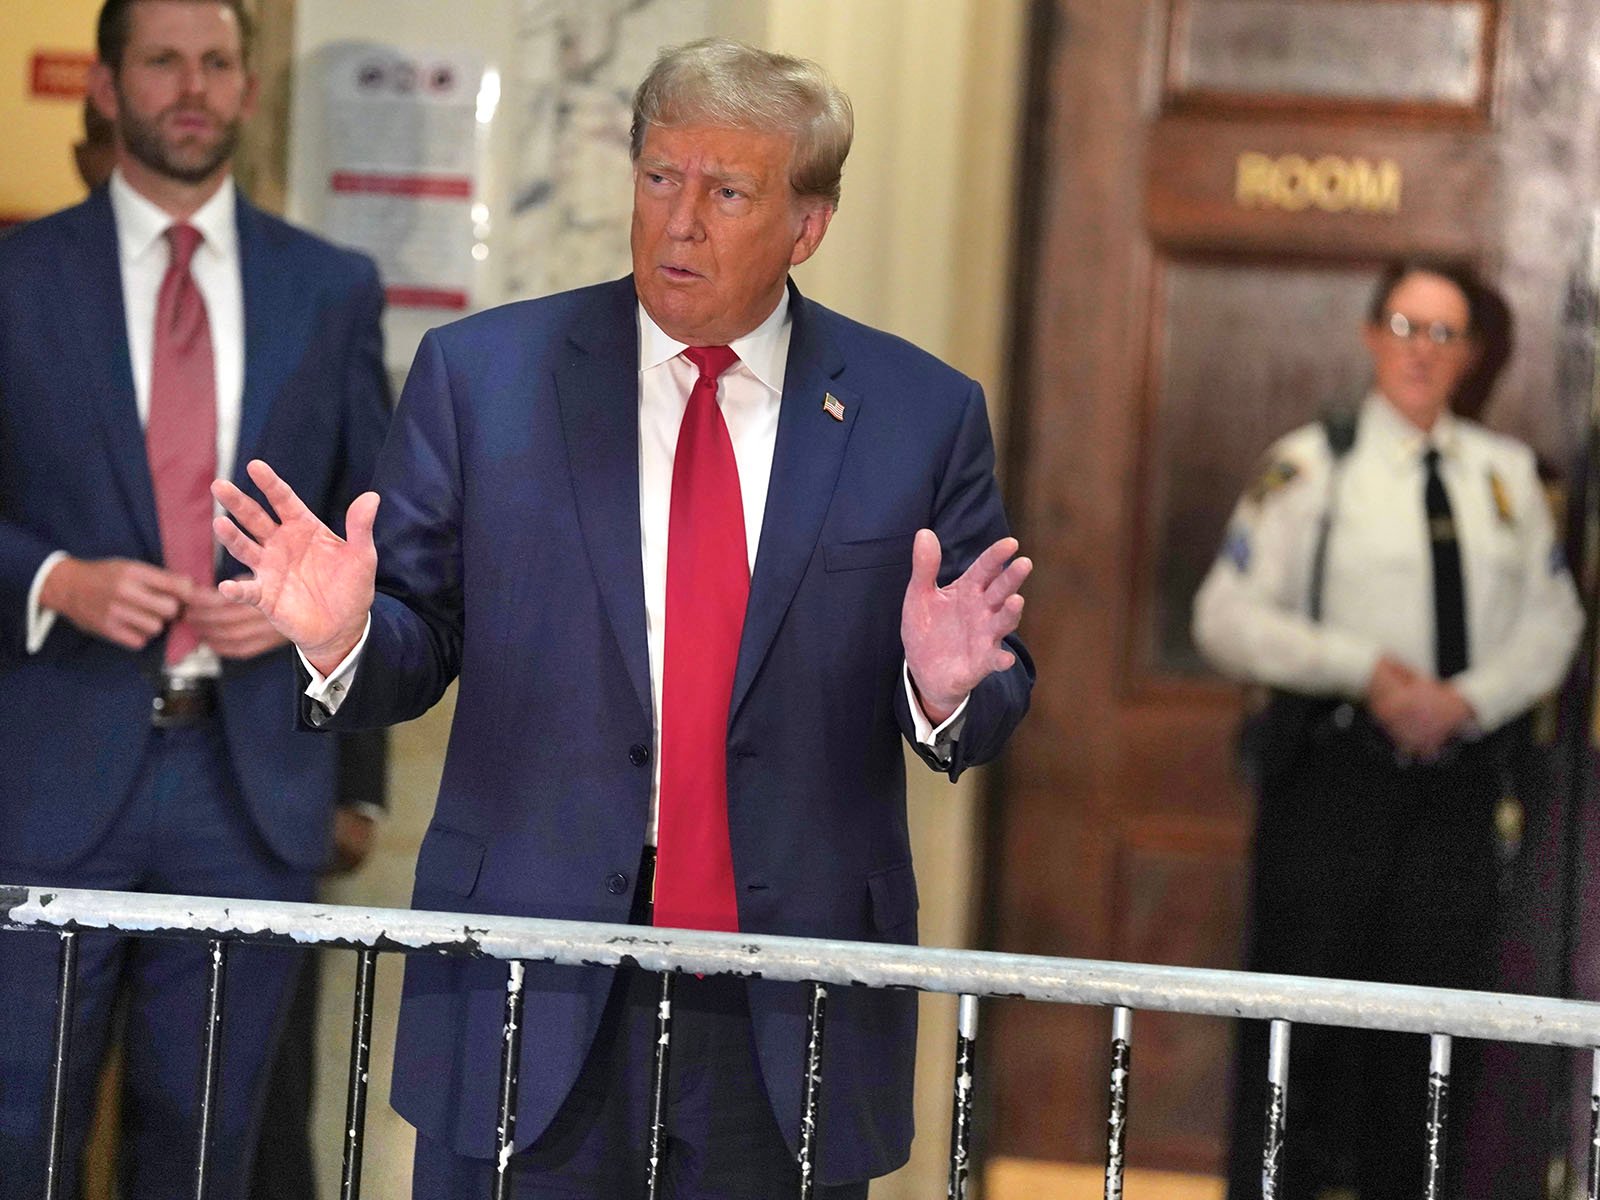 former president Donald Trump in a courthouse